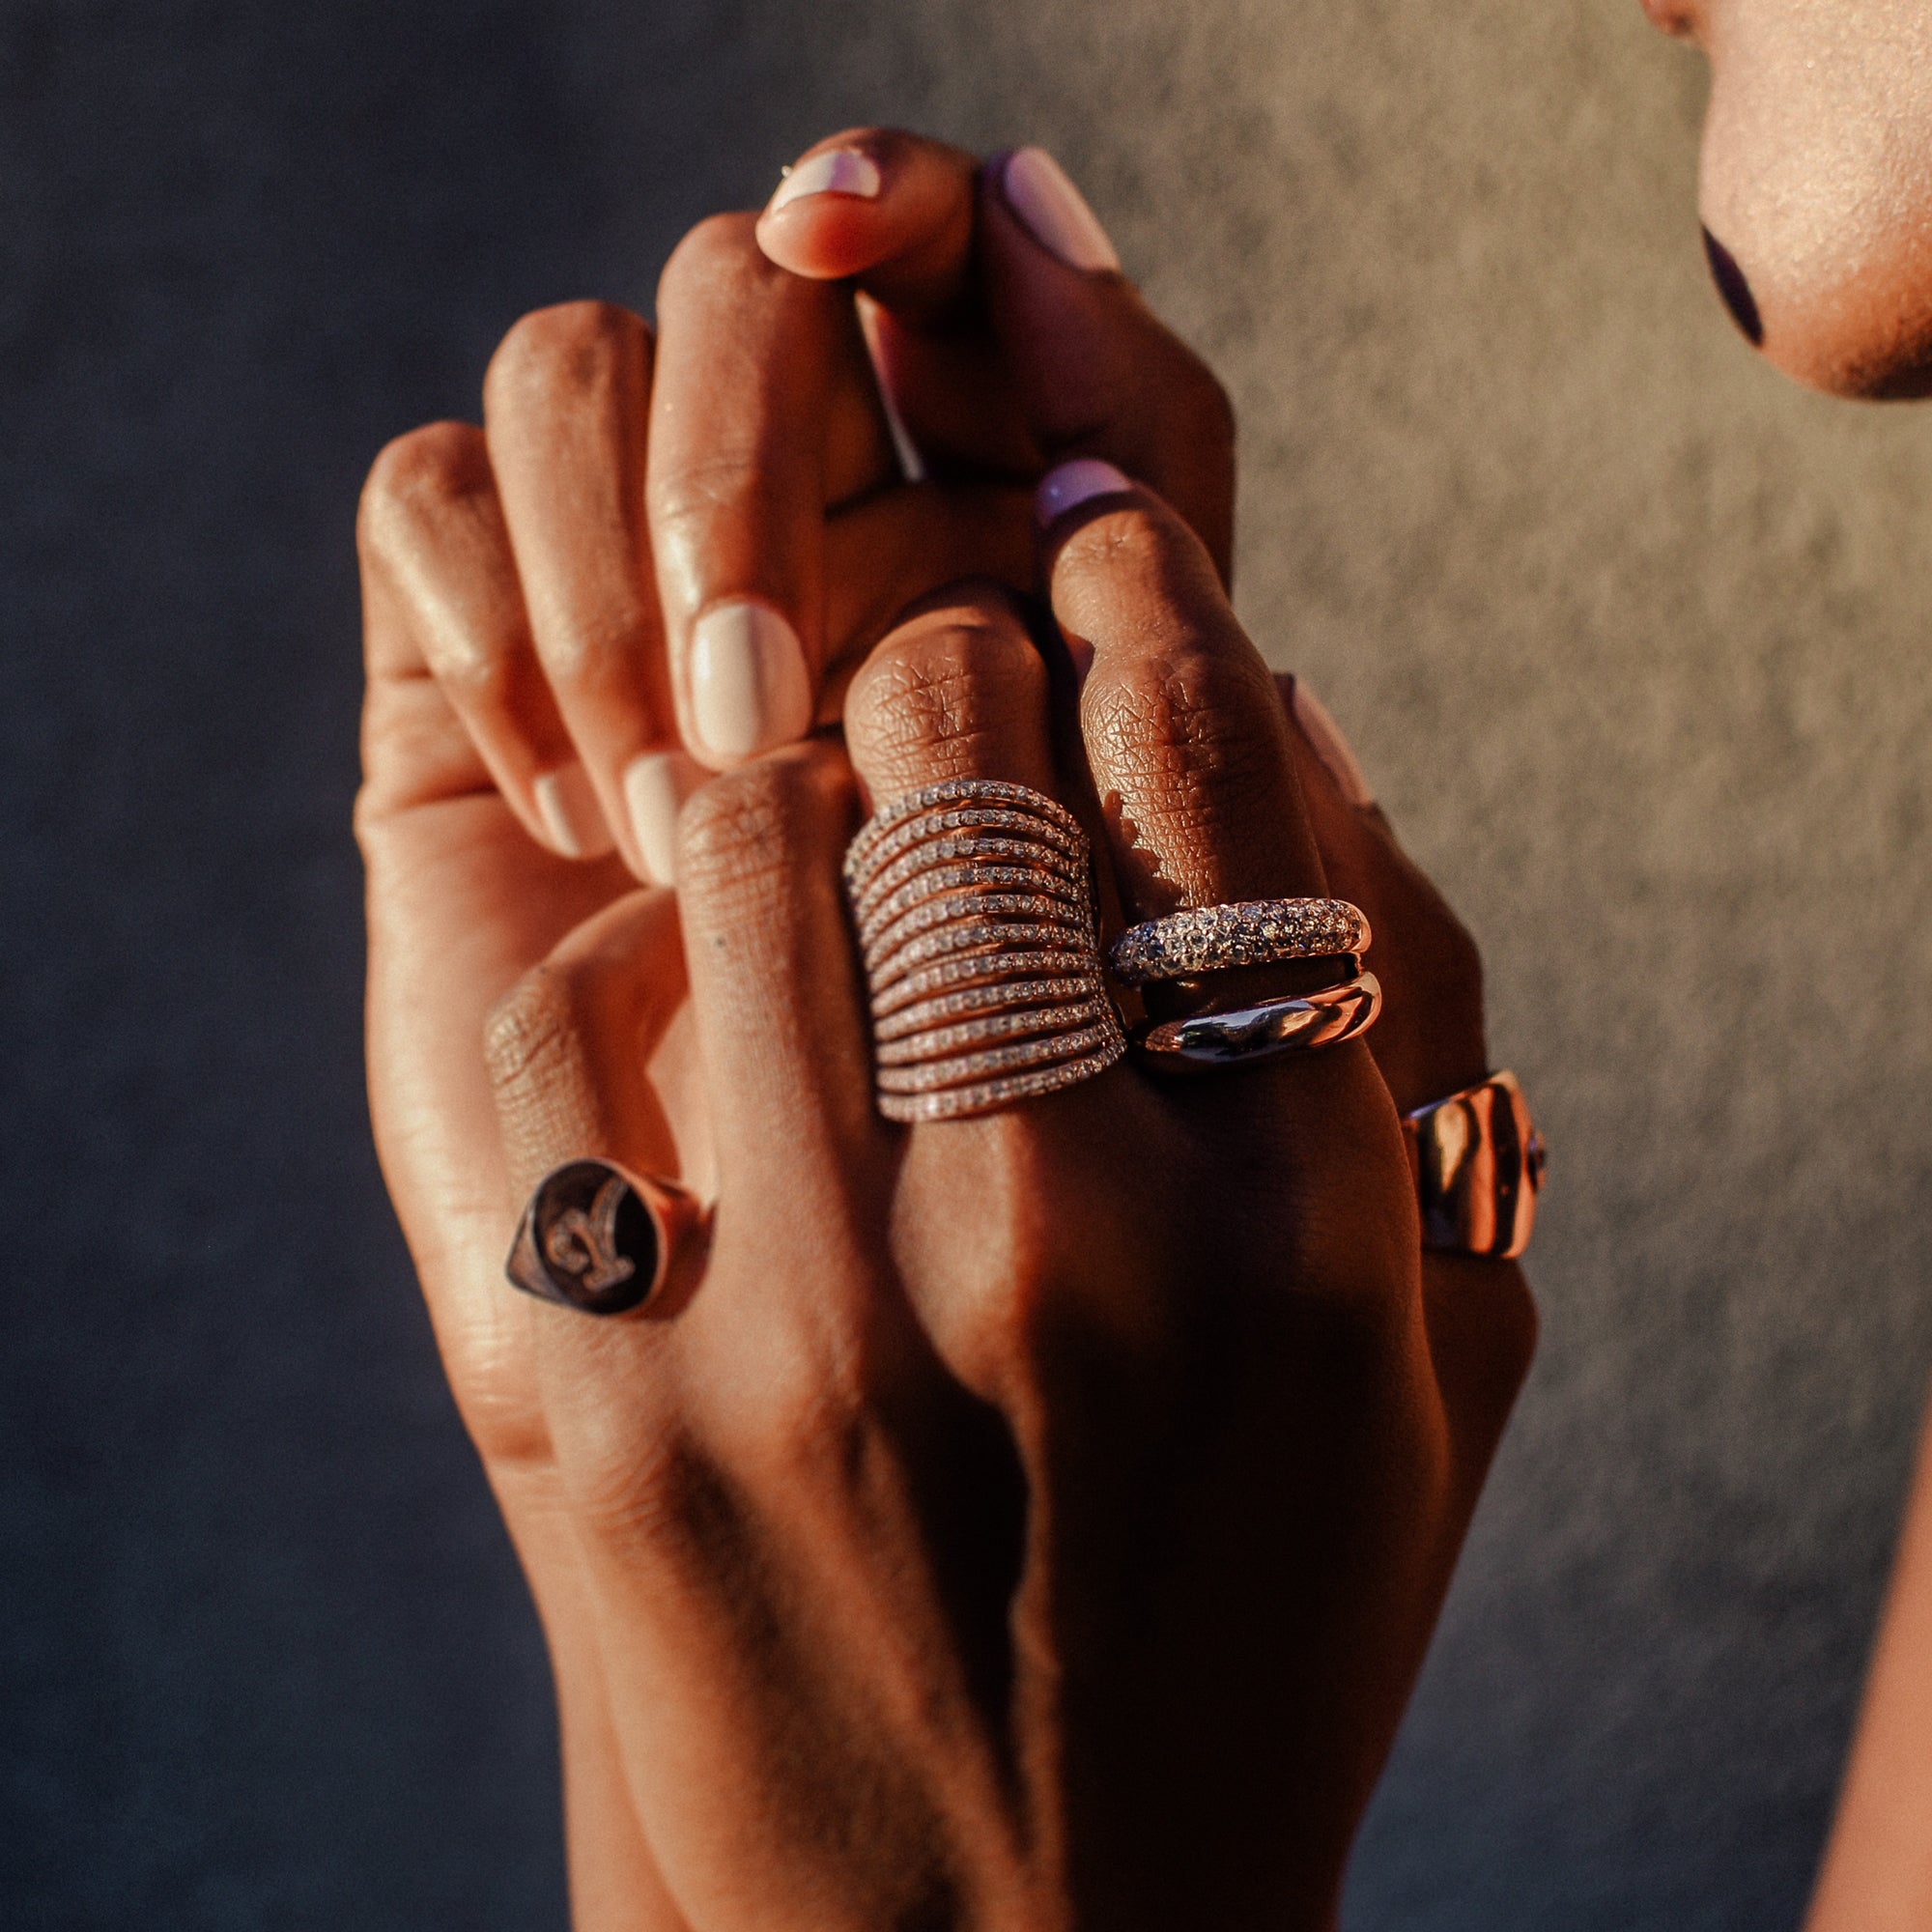 The Spine Ring shown with the Gemini Ring and Mini Chilla Ring.